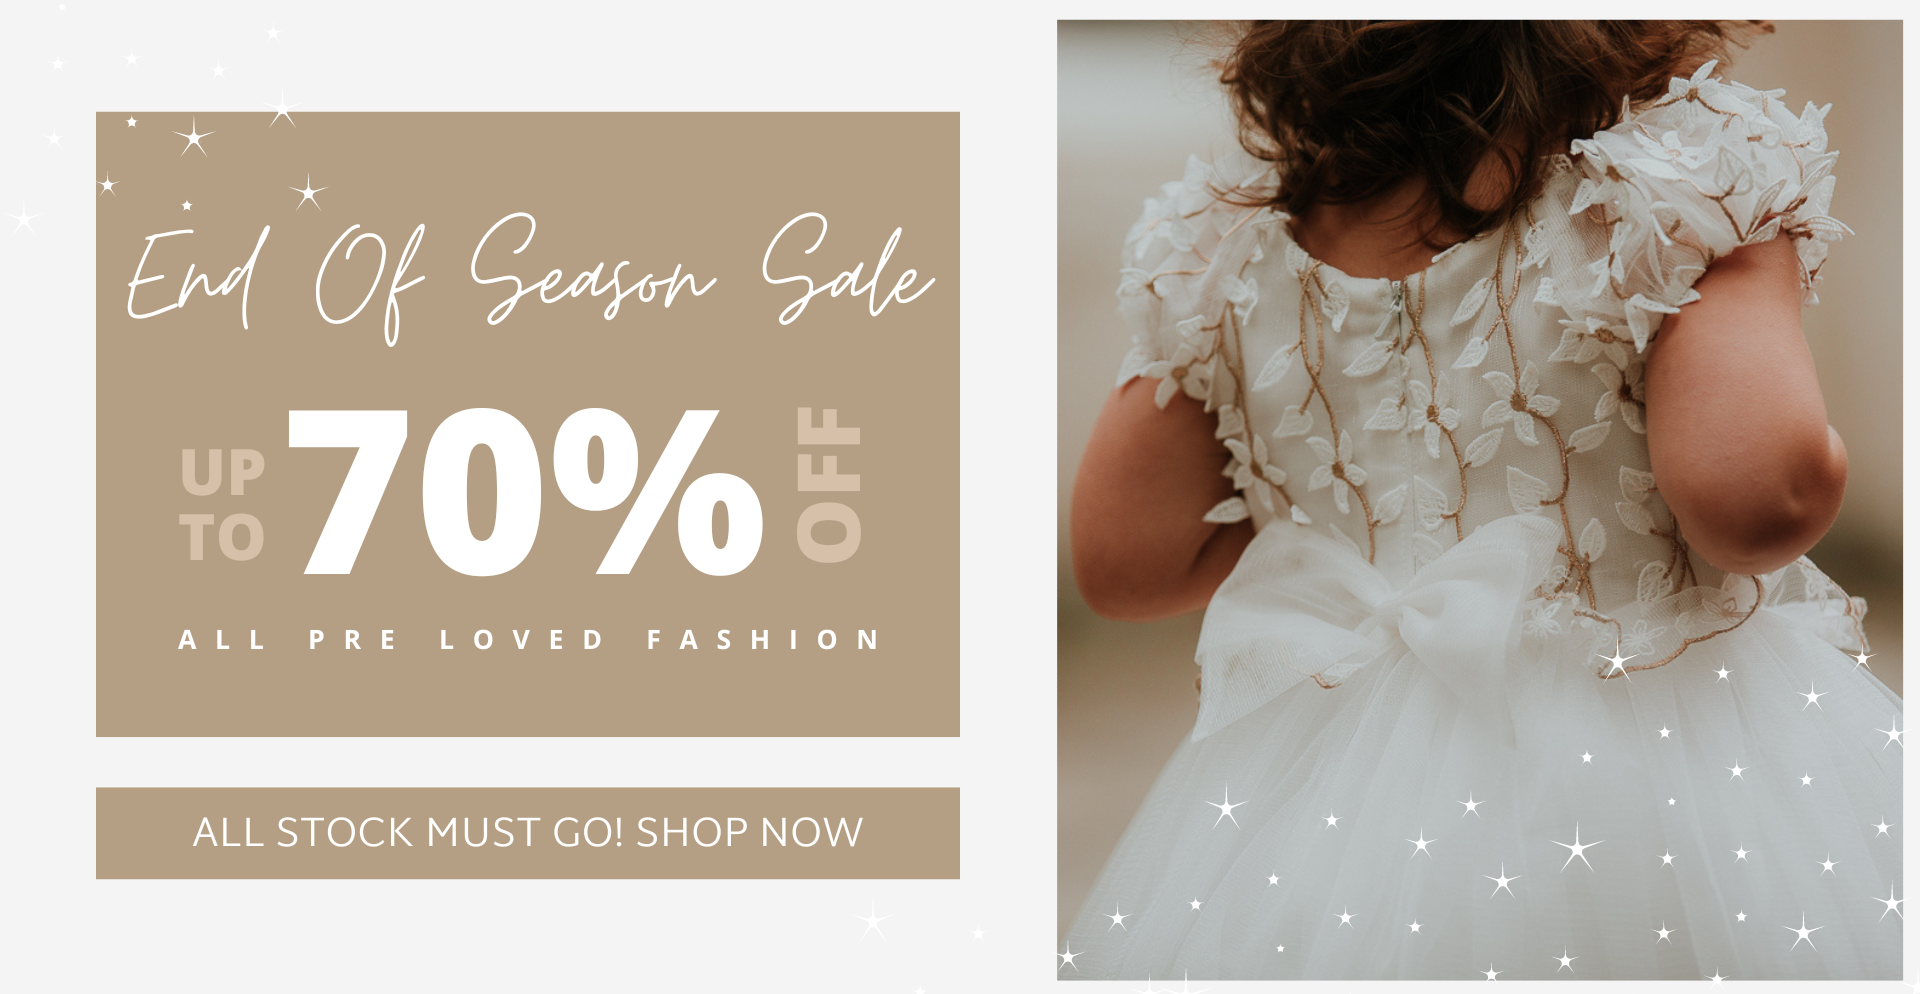 Image of a young girl wearing a flower girl dress with text as follows: End of season sale. Up to 70% off all pre loved fashion. All stock must go!